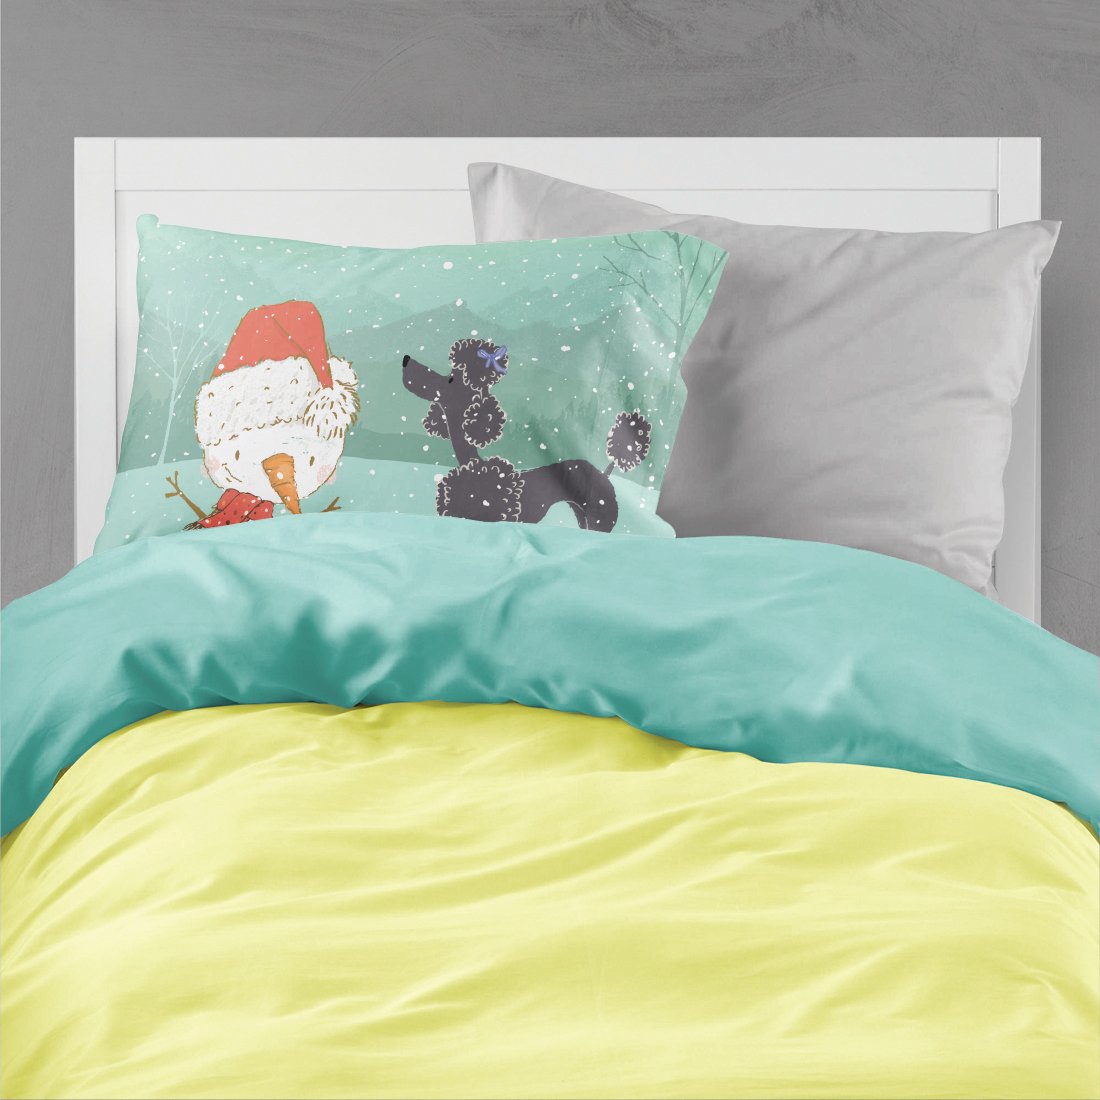 Standard Caroline's Treasures BB1876PILLOWCASE Snowman with Chocolate Brown Poodle Fabric Standard Pillowcase Multicolor 